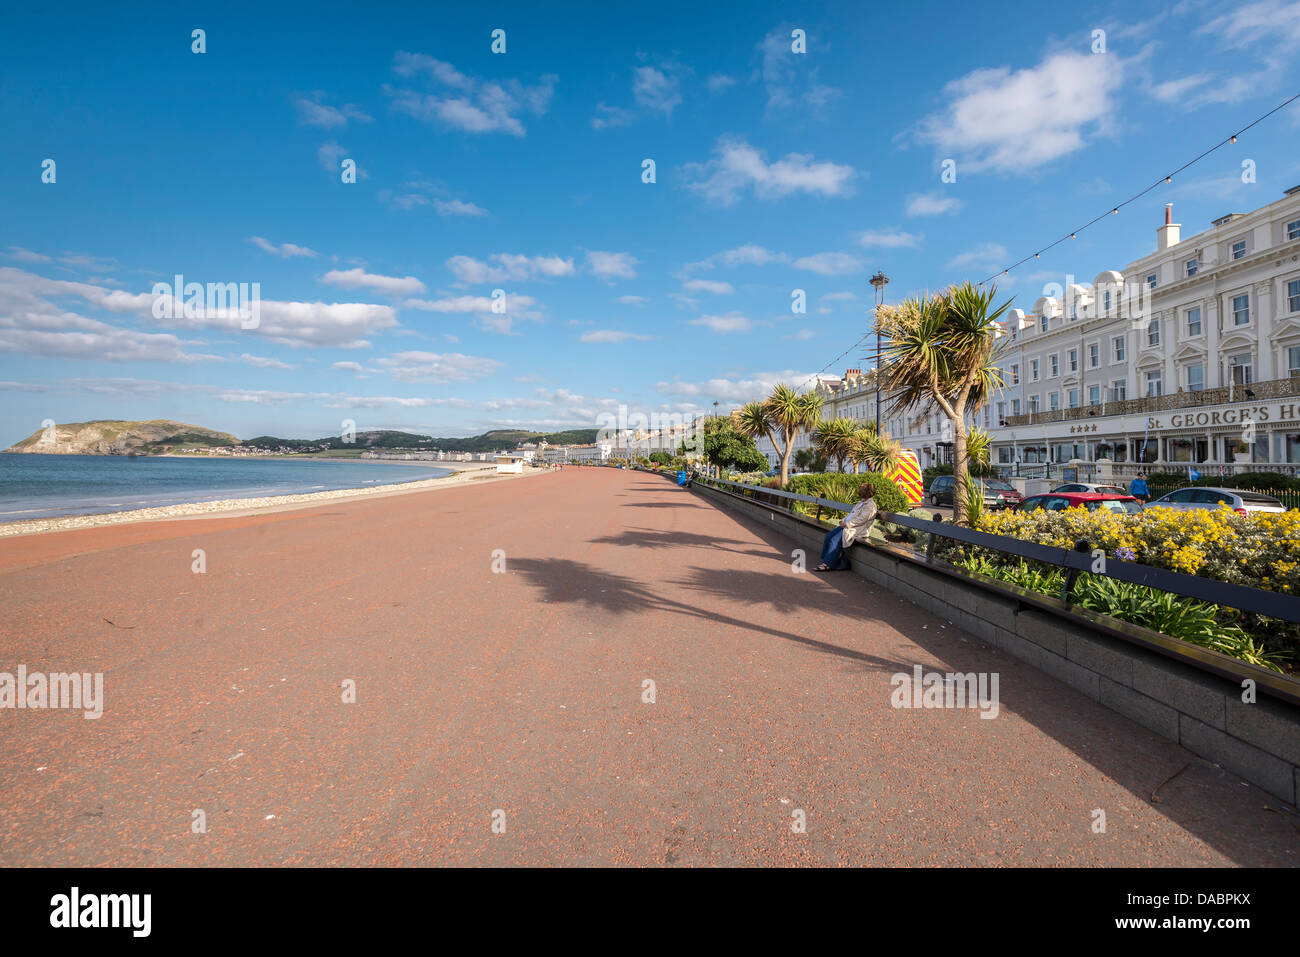 The sweeping bay, promenade and Victorian hotels on the North Bay of Llandudno in Clwyd North Wales. Stock Photo